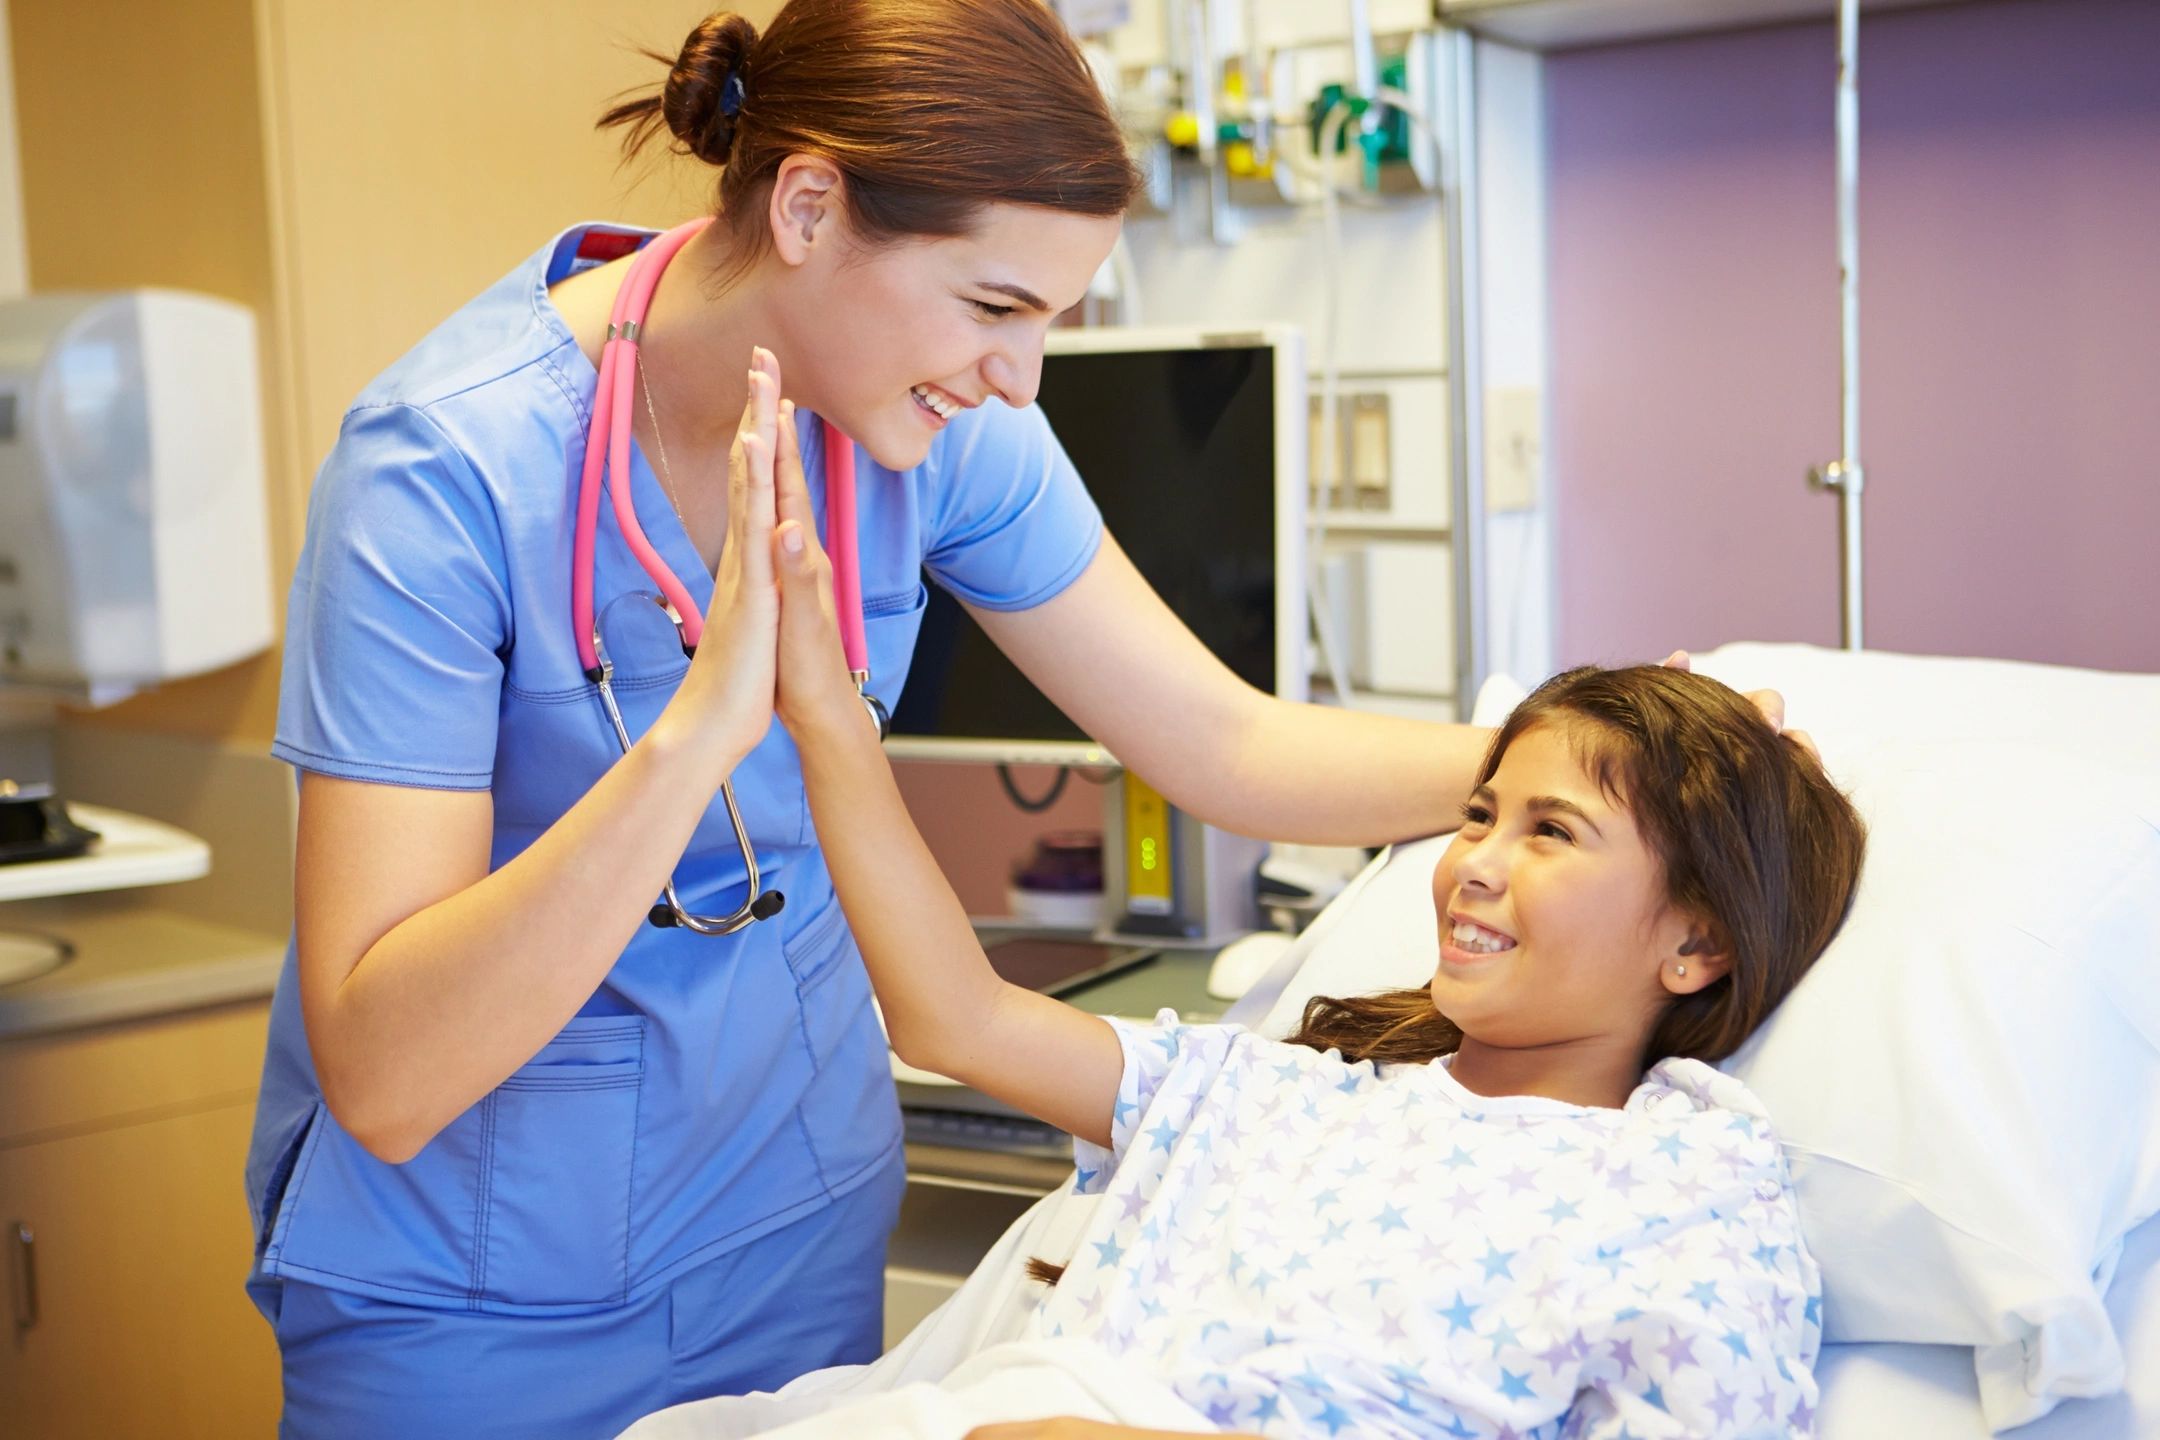 Five Ways Nurses Can Better Support Their Patients